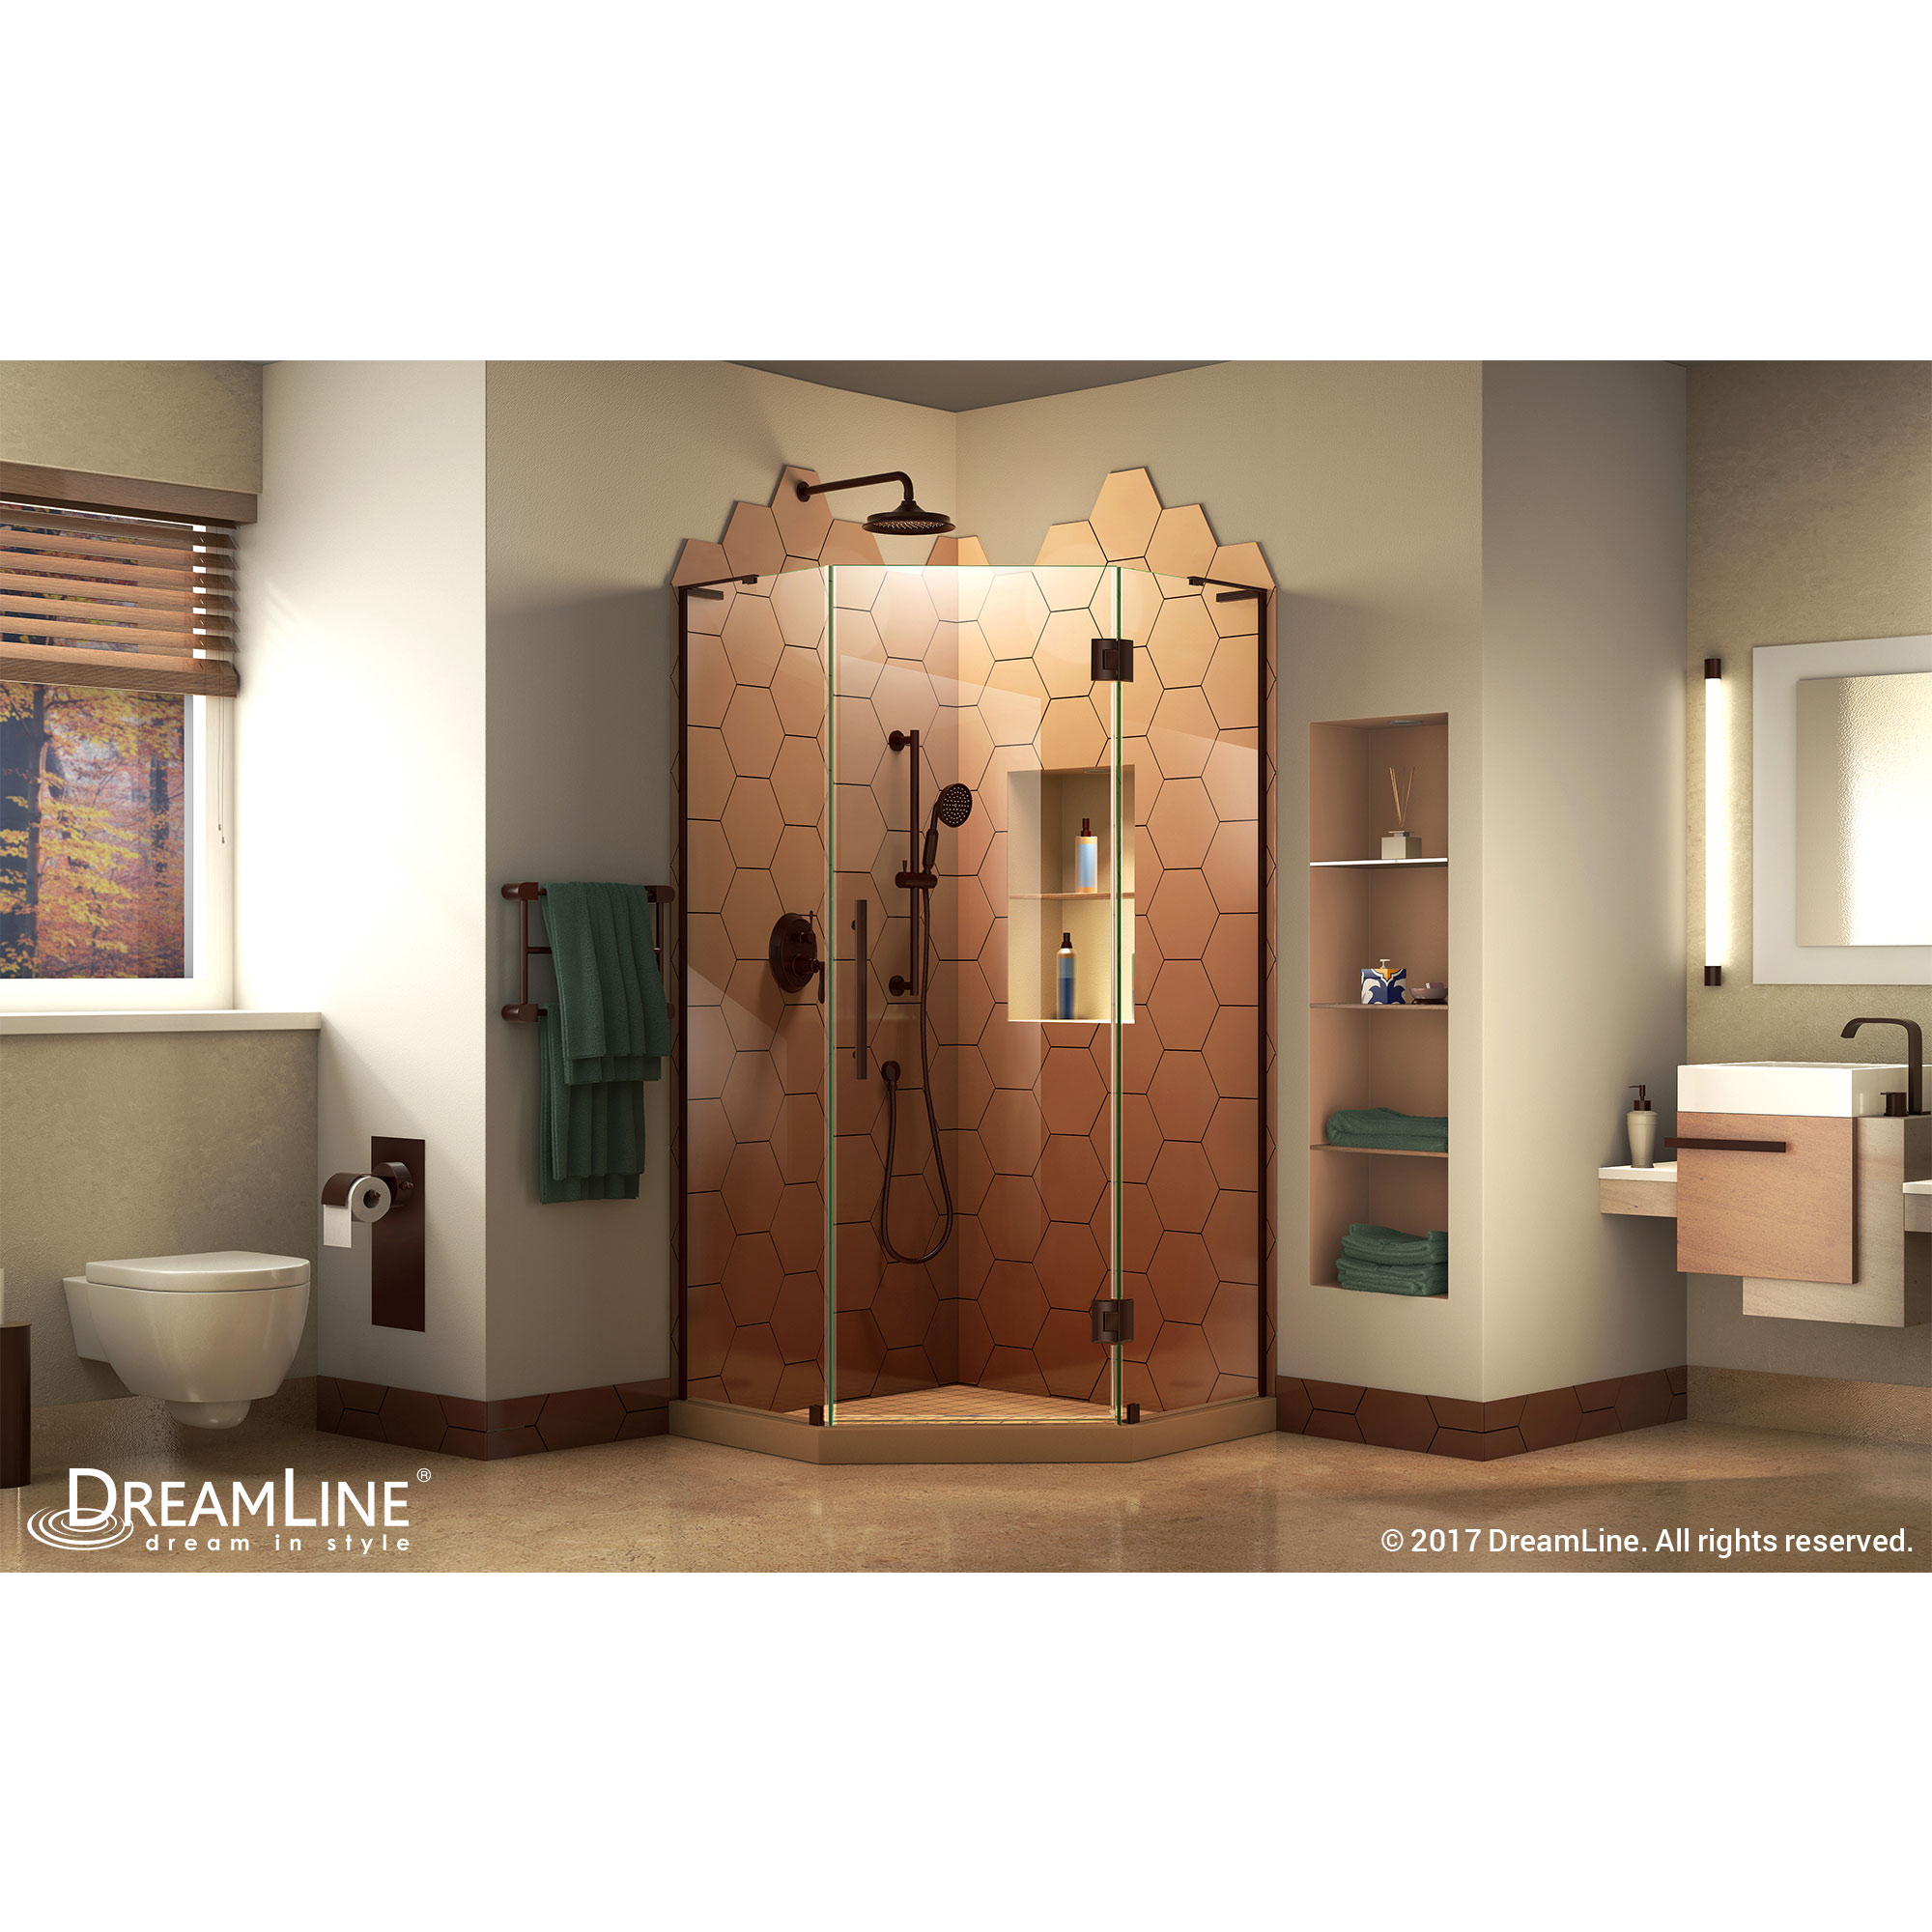 DreamLine Prism Plus 34 in. D x 34 in. W x 72 in. H Frameless Hinged Shower Enclosure in Oil Rubbed Bronze